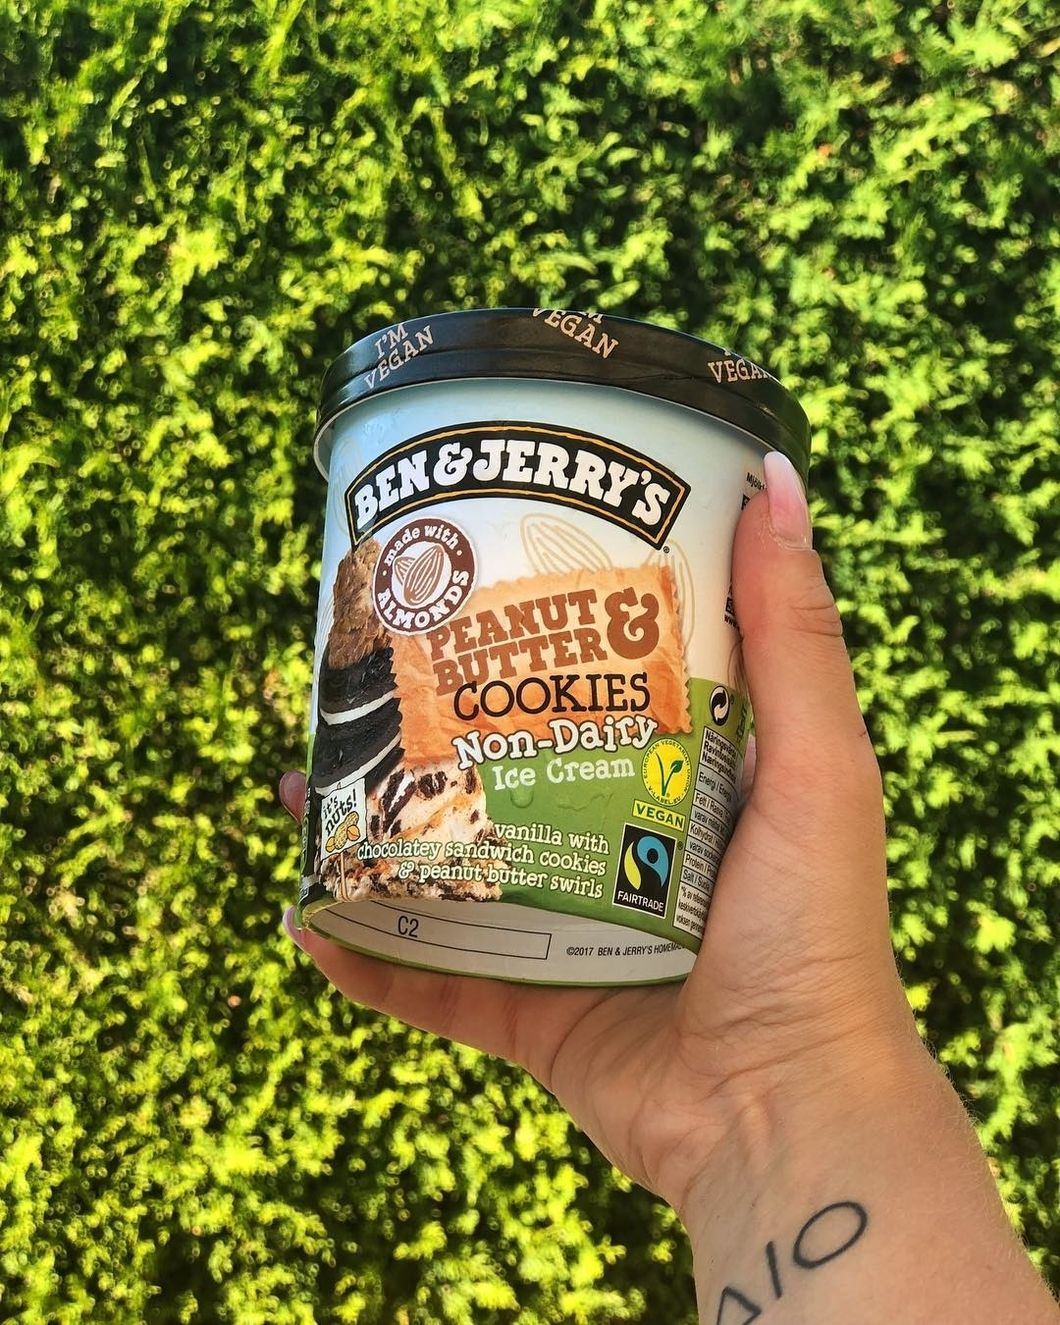 Ben & Jerry's Is The King Of Vegan Ice Cream, And That Is A Fact